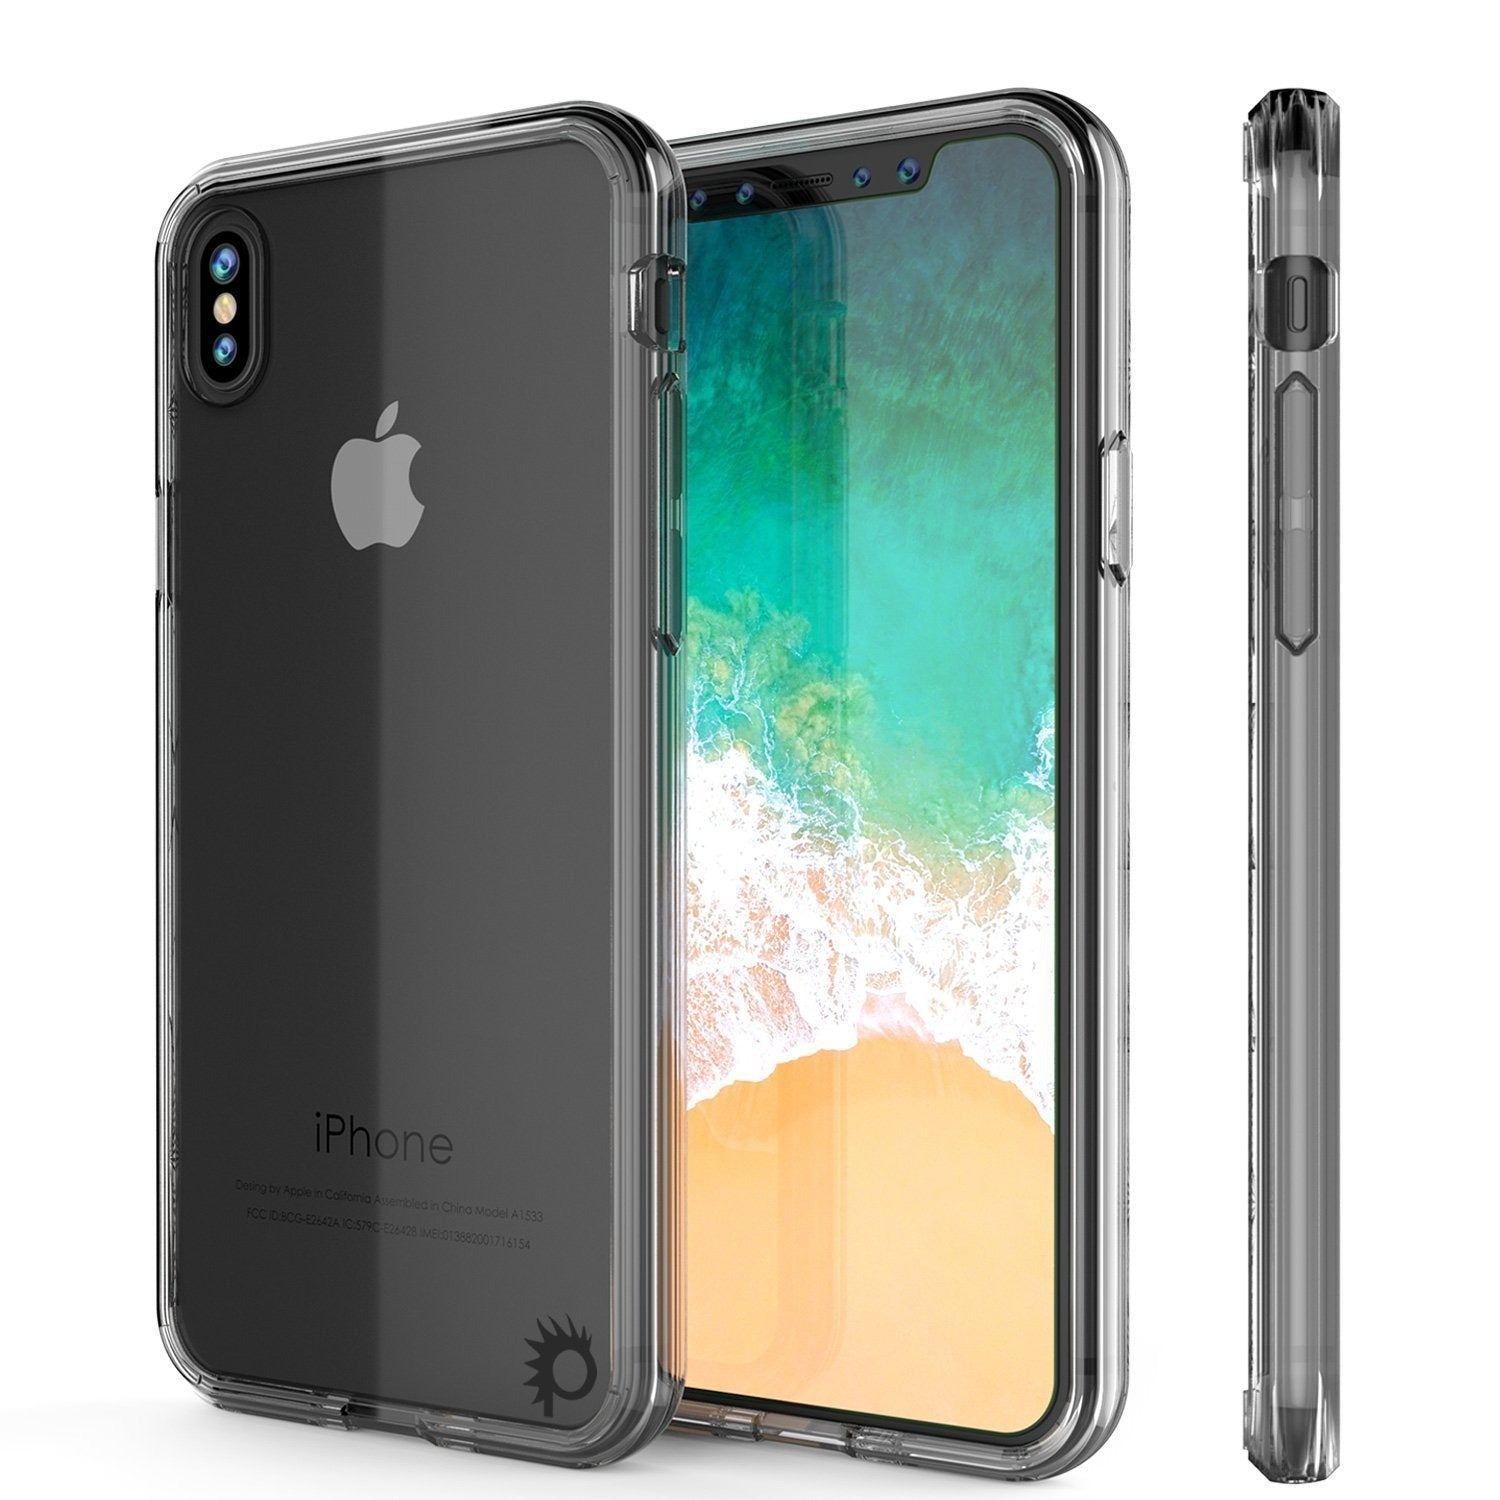 iPhone XR Case, PUNKcase [Lucid 2.0 Series] [Slim Fit] Armor Cover [Clear] (Color in image: Clear)